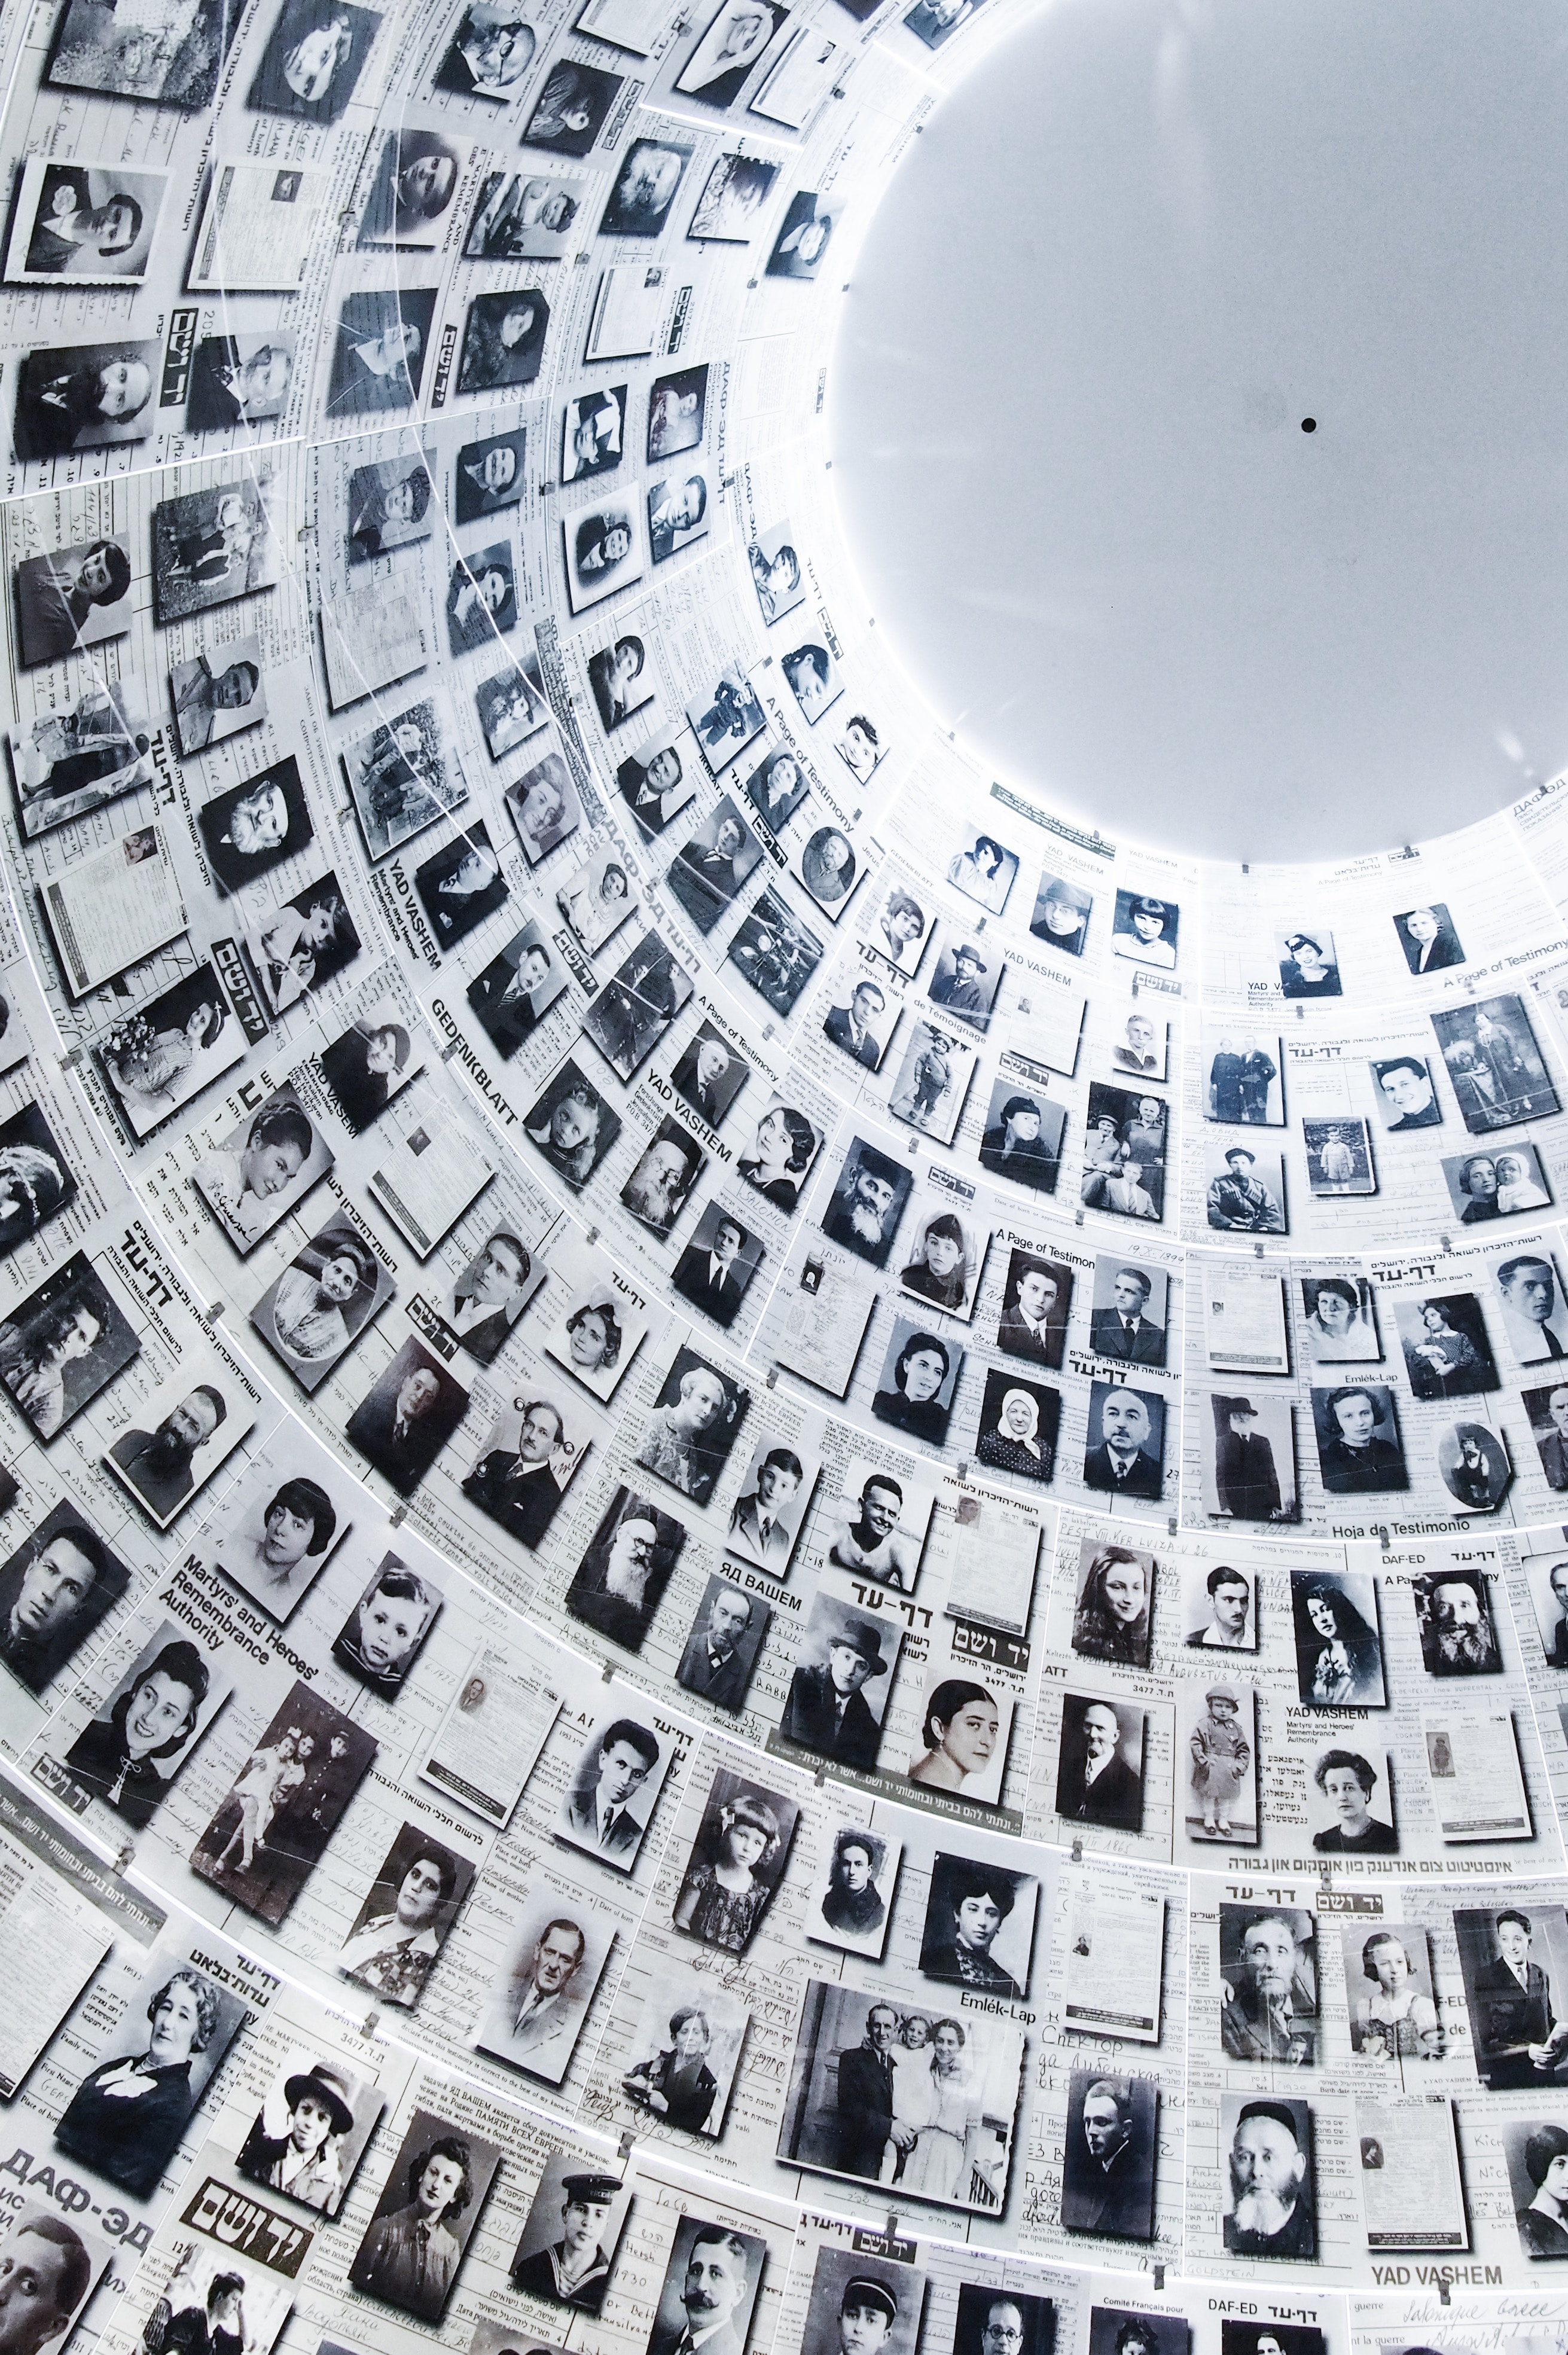 Image of black and white photos of Holocaust victims